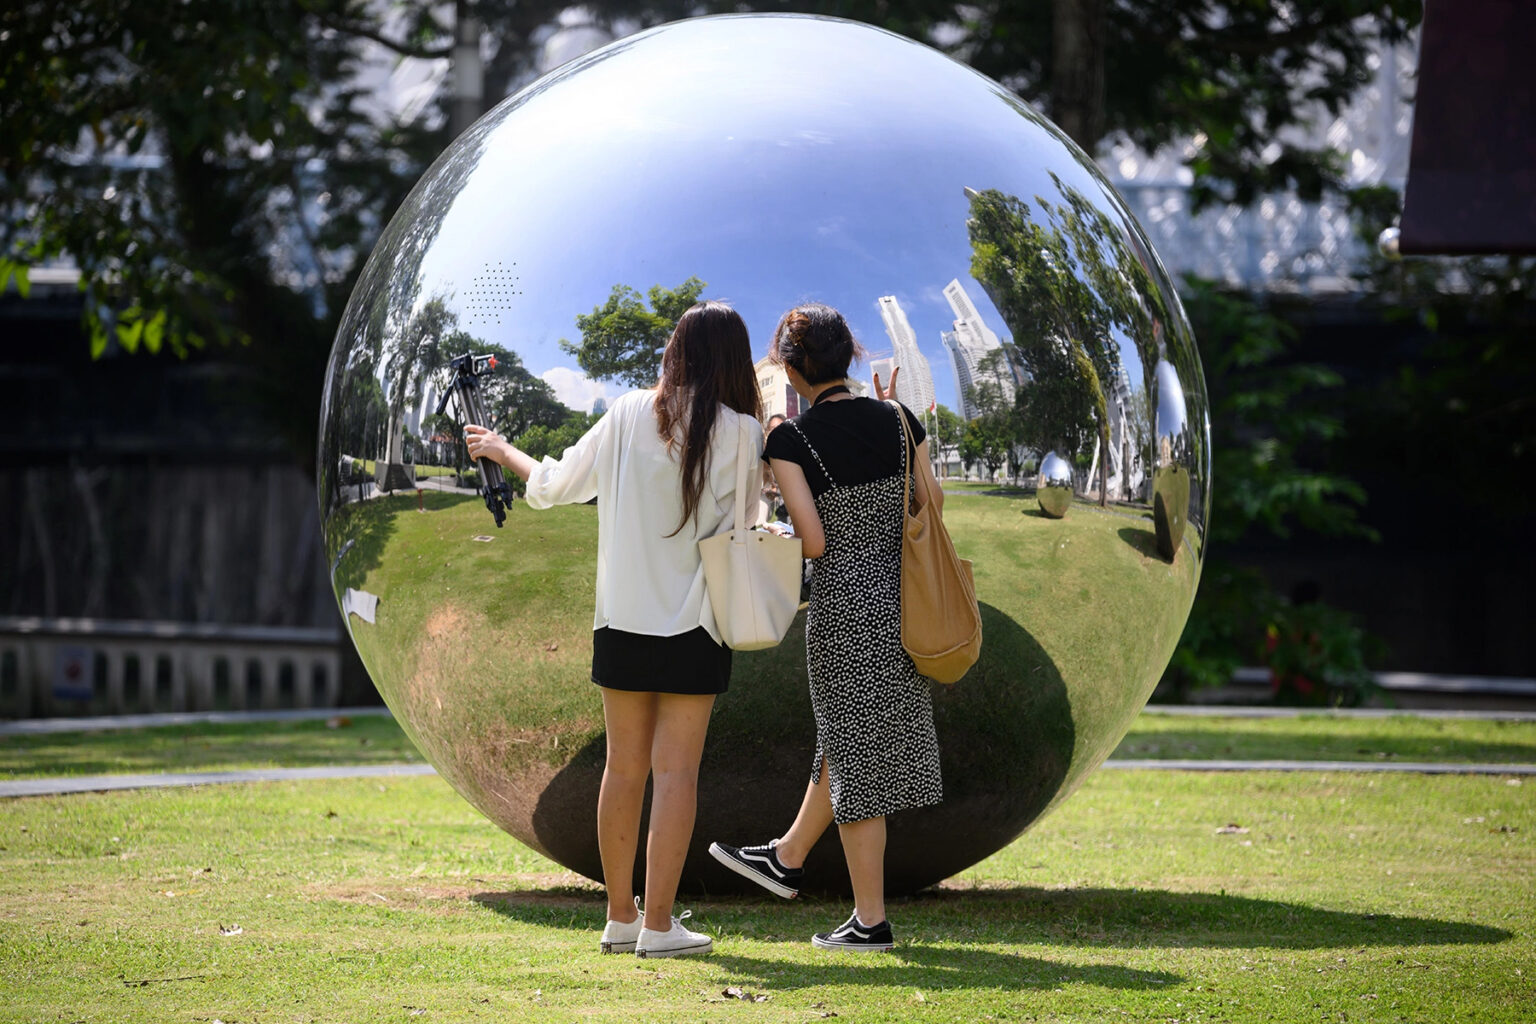 Two women looking at their reflections in a large metal ball